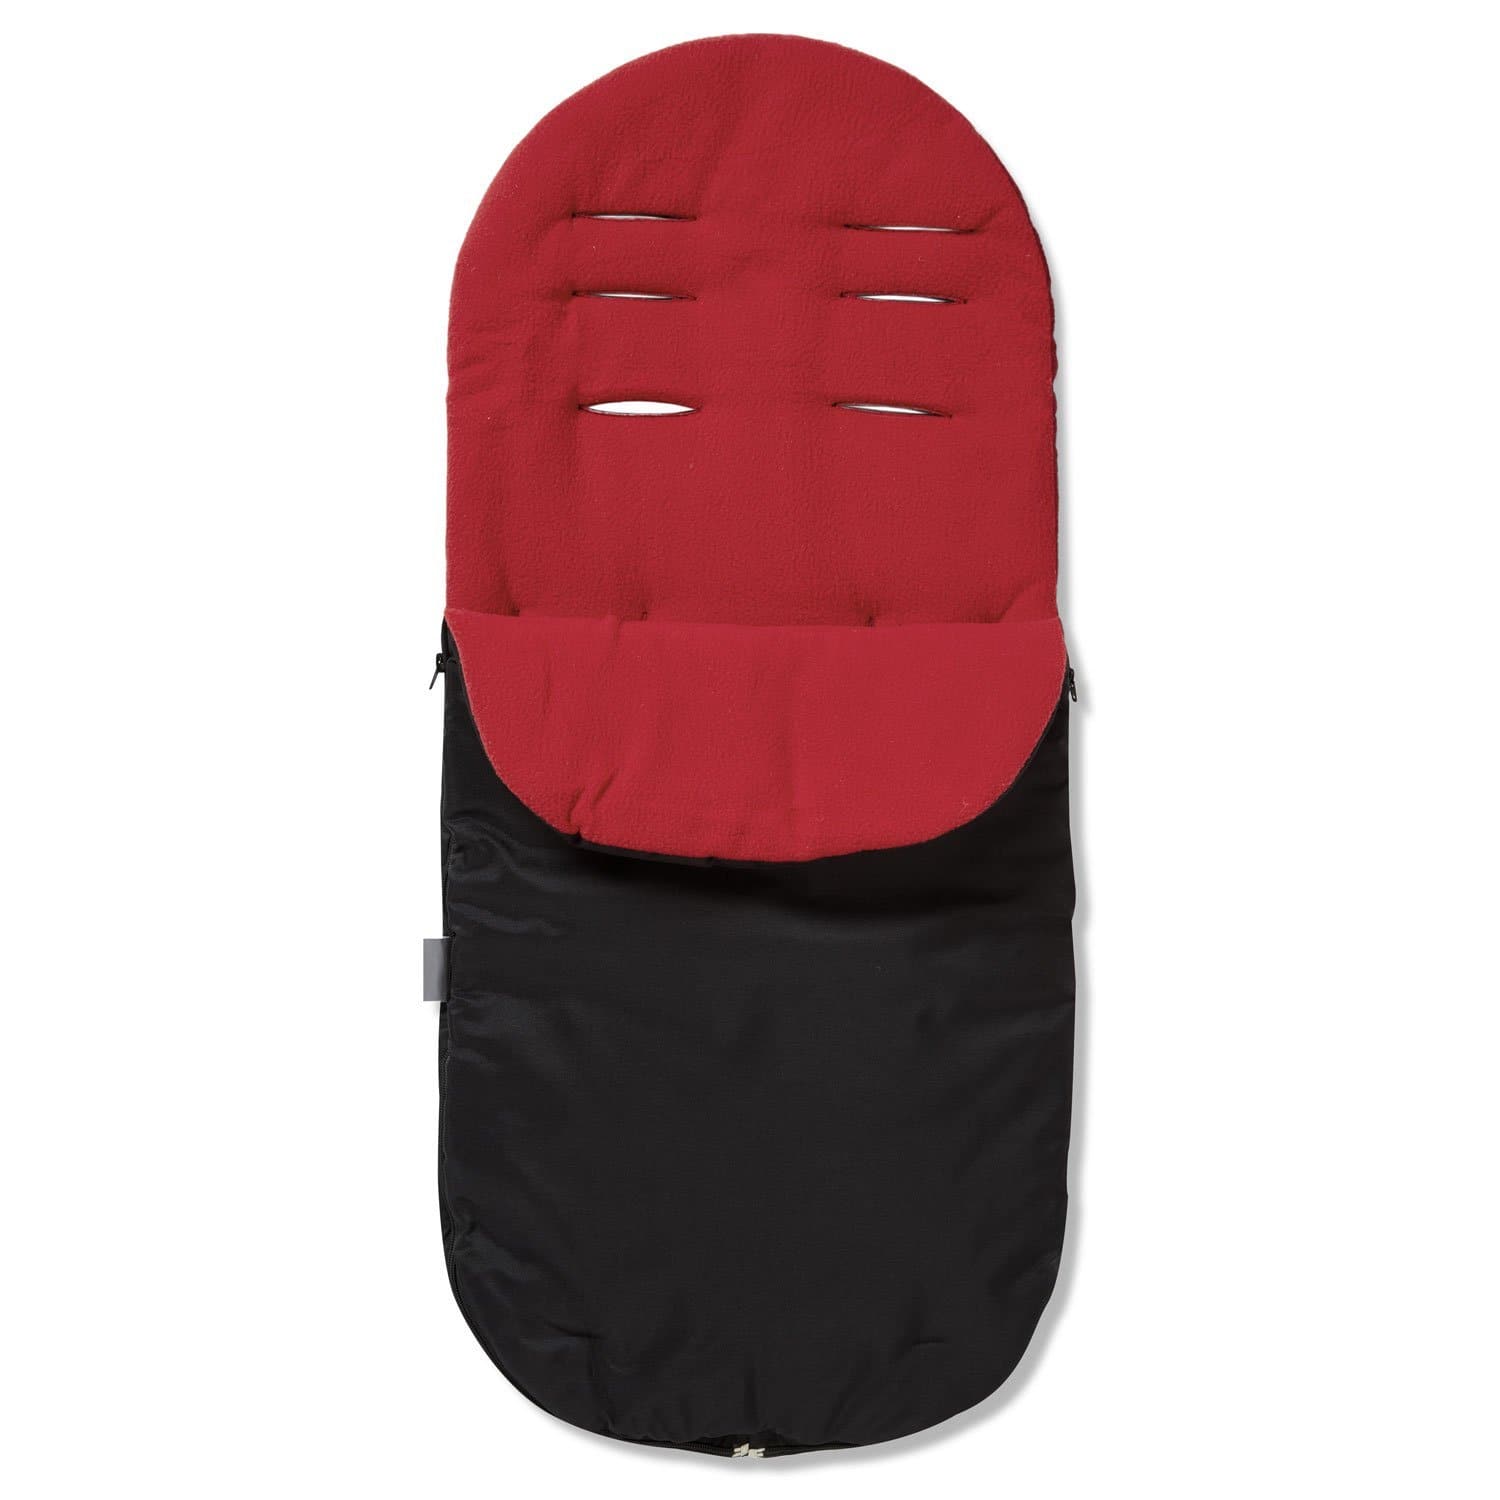 Footmuff / Cosy Toes Compatible with Concord - Red / Fits All Models | For Your Little One